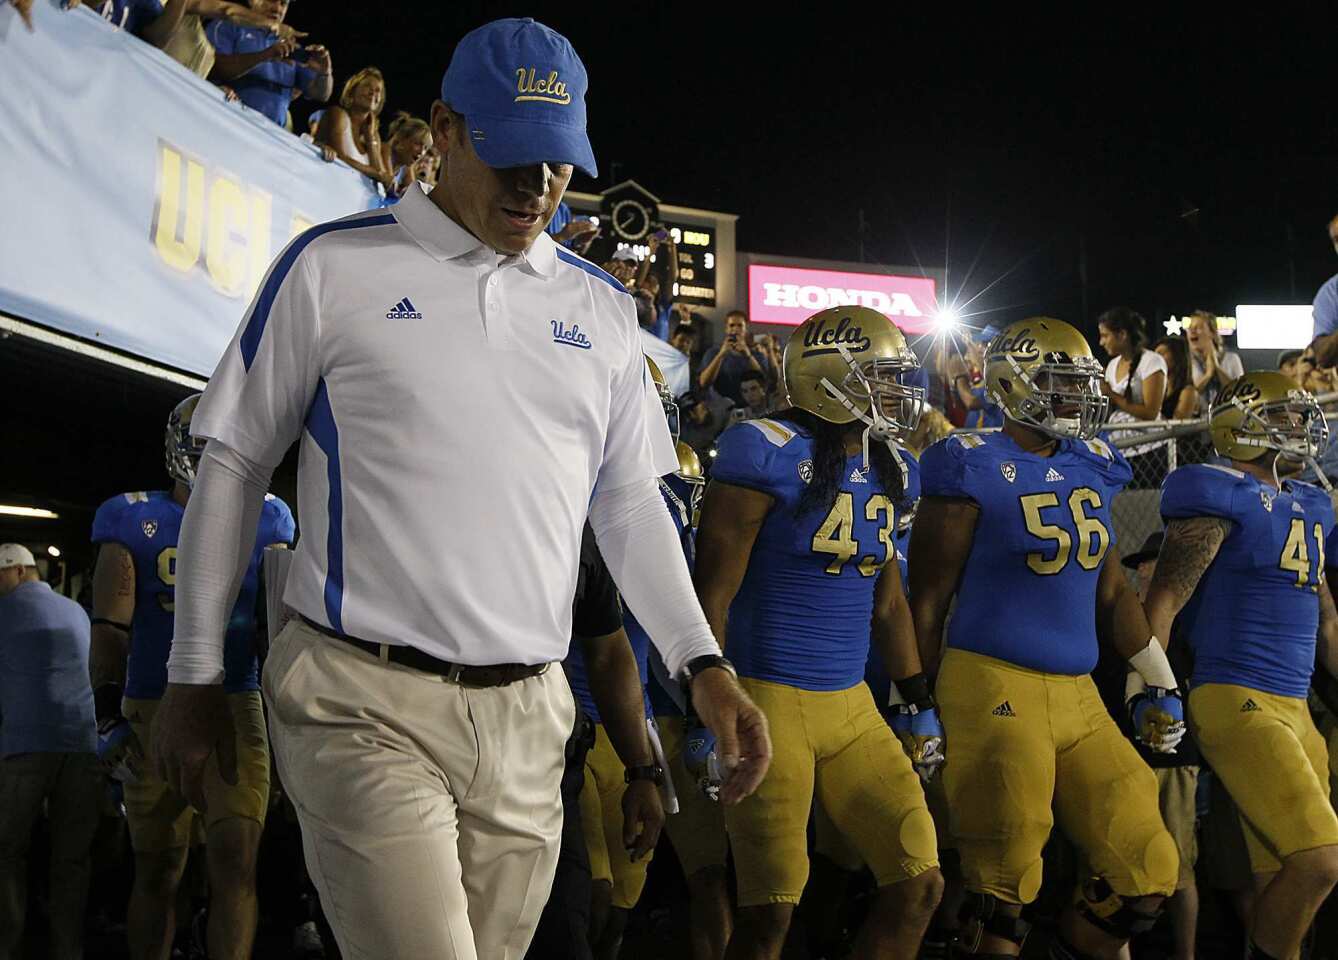 UCLA Coach Jim Mora leads the Bruins onto the field for their game against Houston on Saturday night at the Rose Bowl.